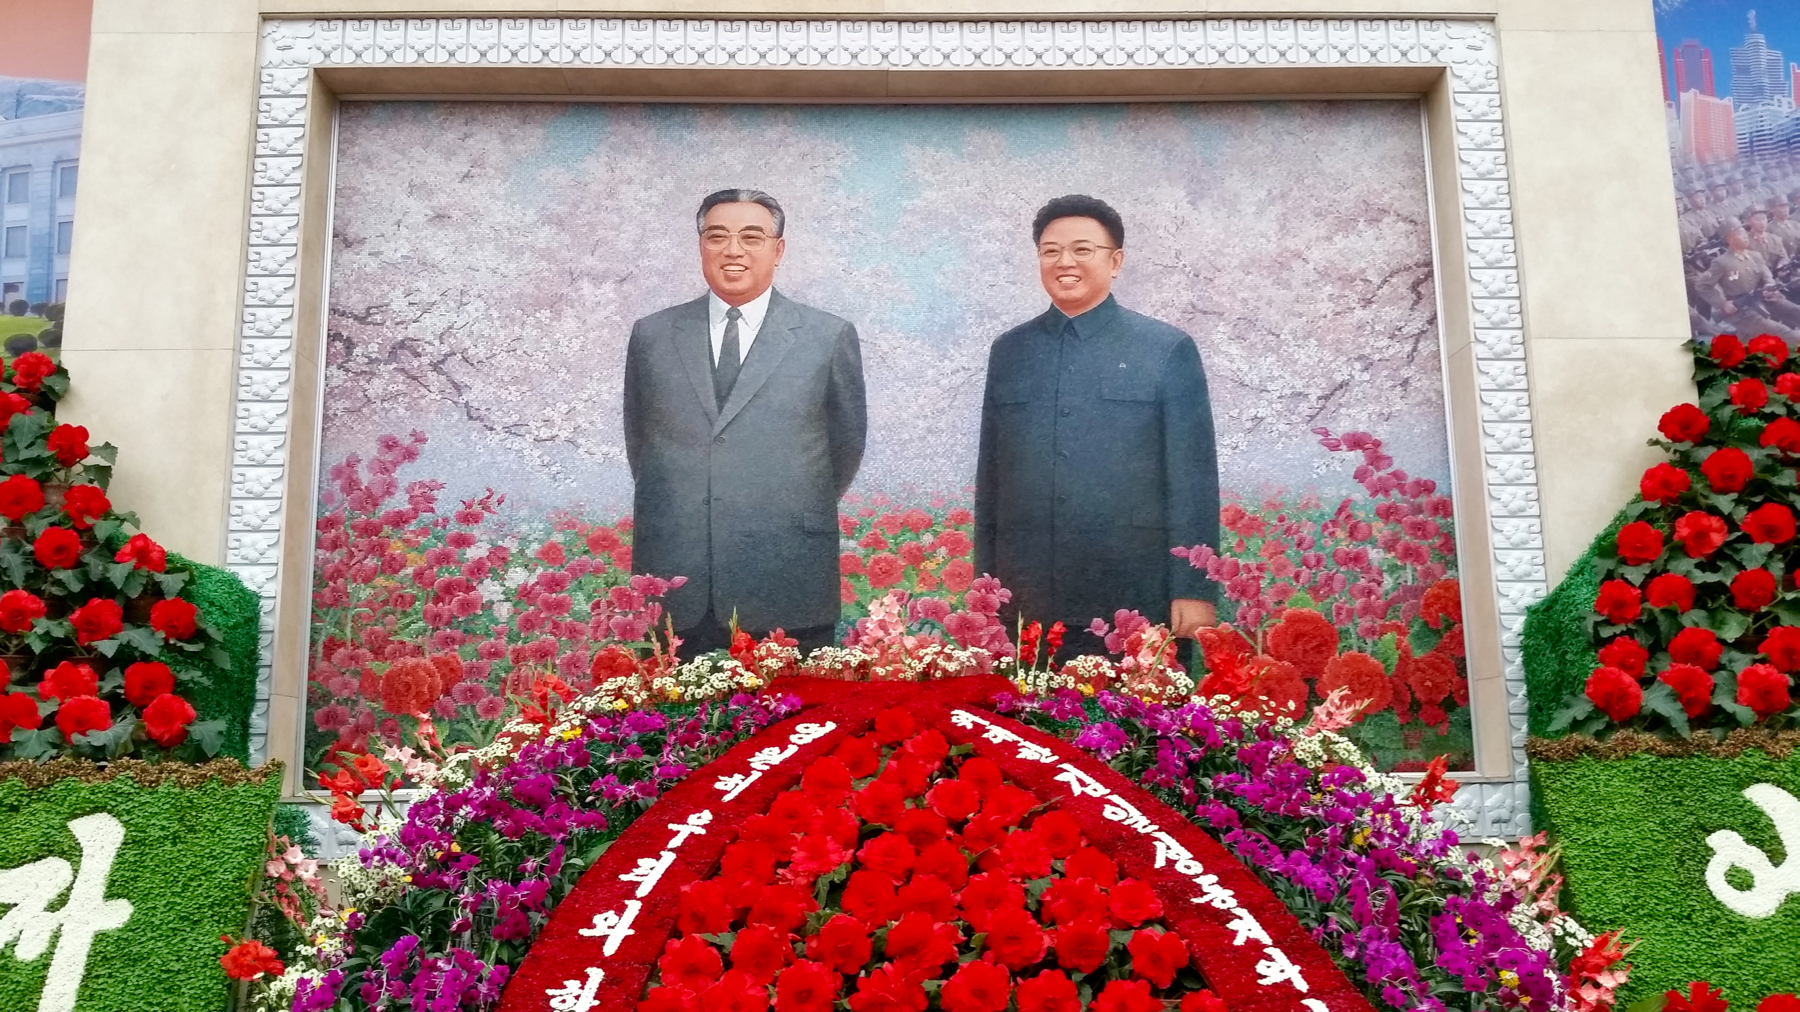 As you enter the exhibit you're greeted by this enormous father-and-son portrait, which I promise you, an image seen time and time again in throughout Pyongyang.